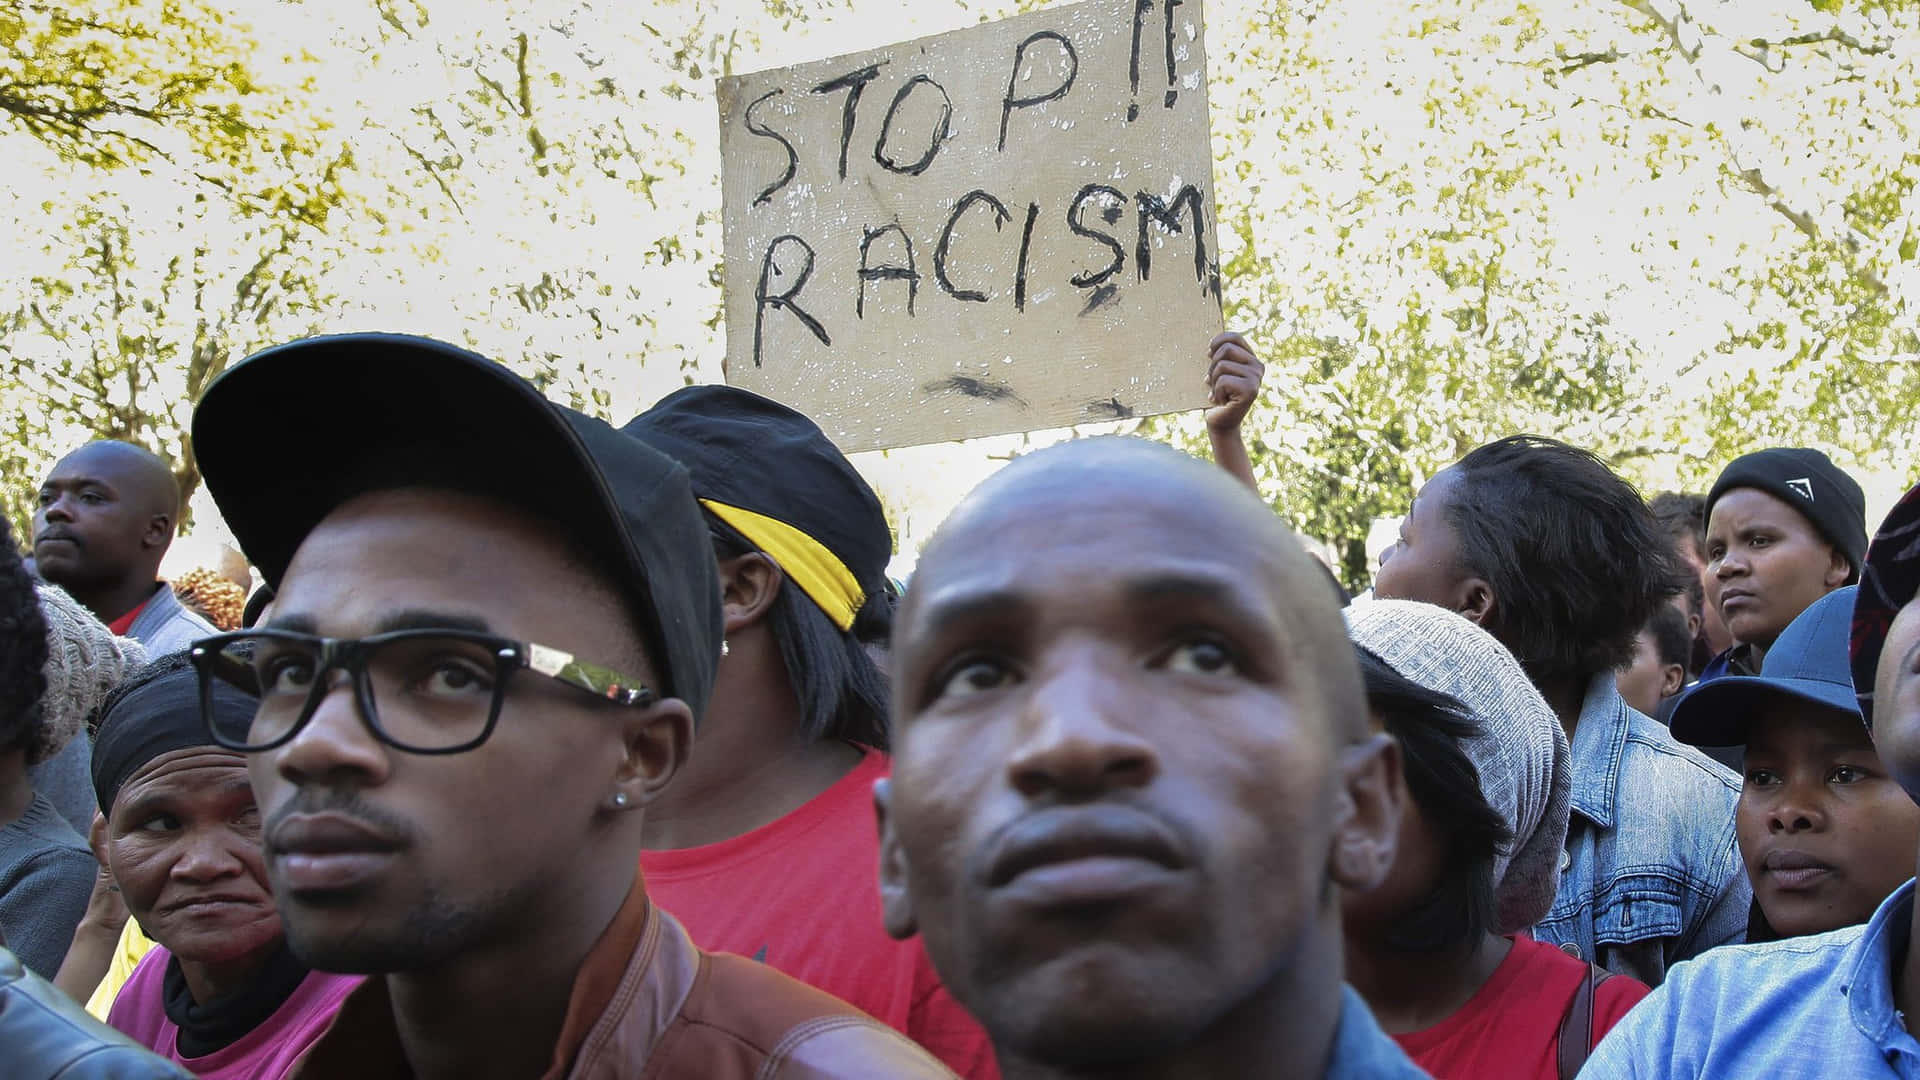 Protesting Against Racism in South Africa Wallpaper